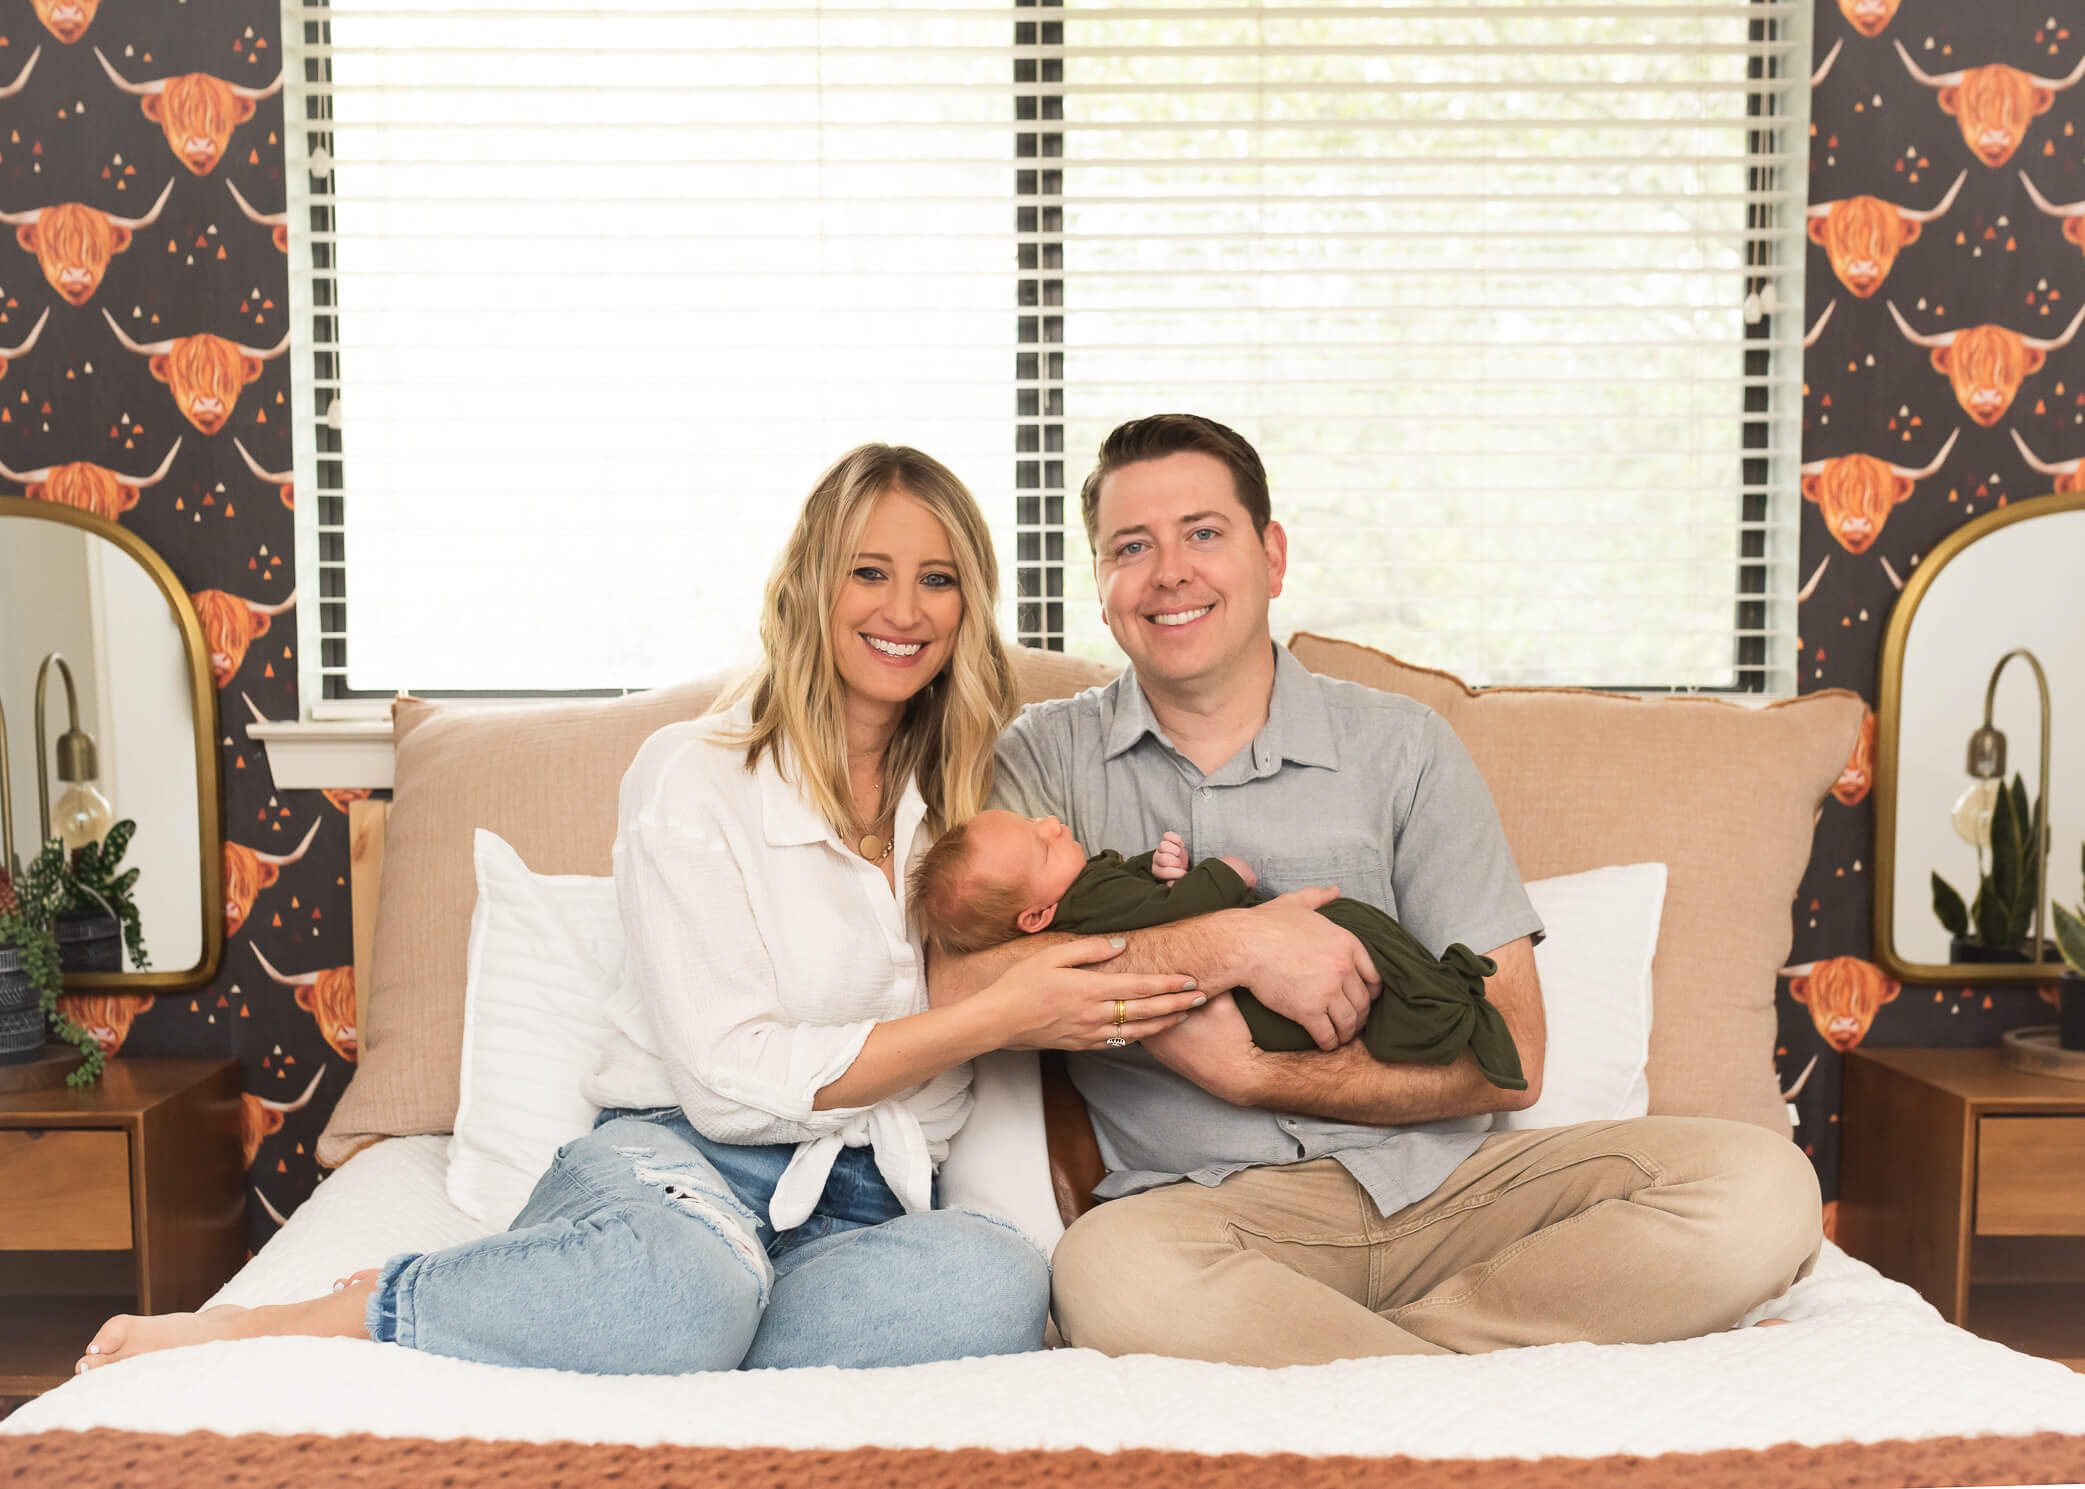 parents on bed looking at photographer smiling, so happy with new baby bow